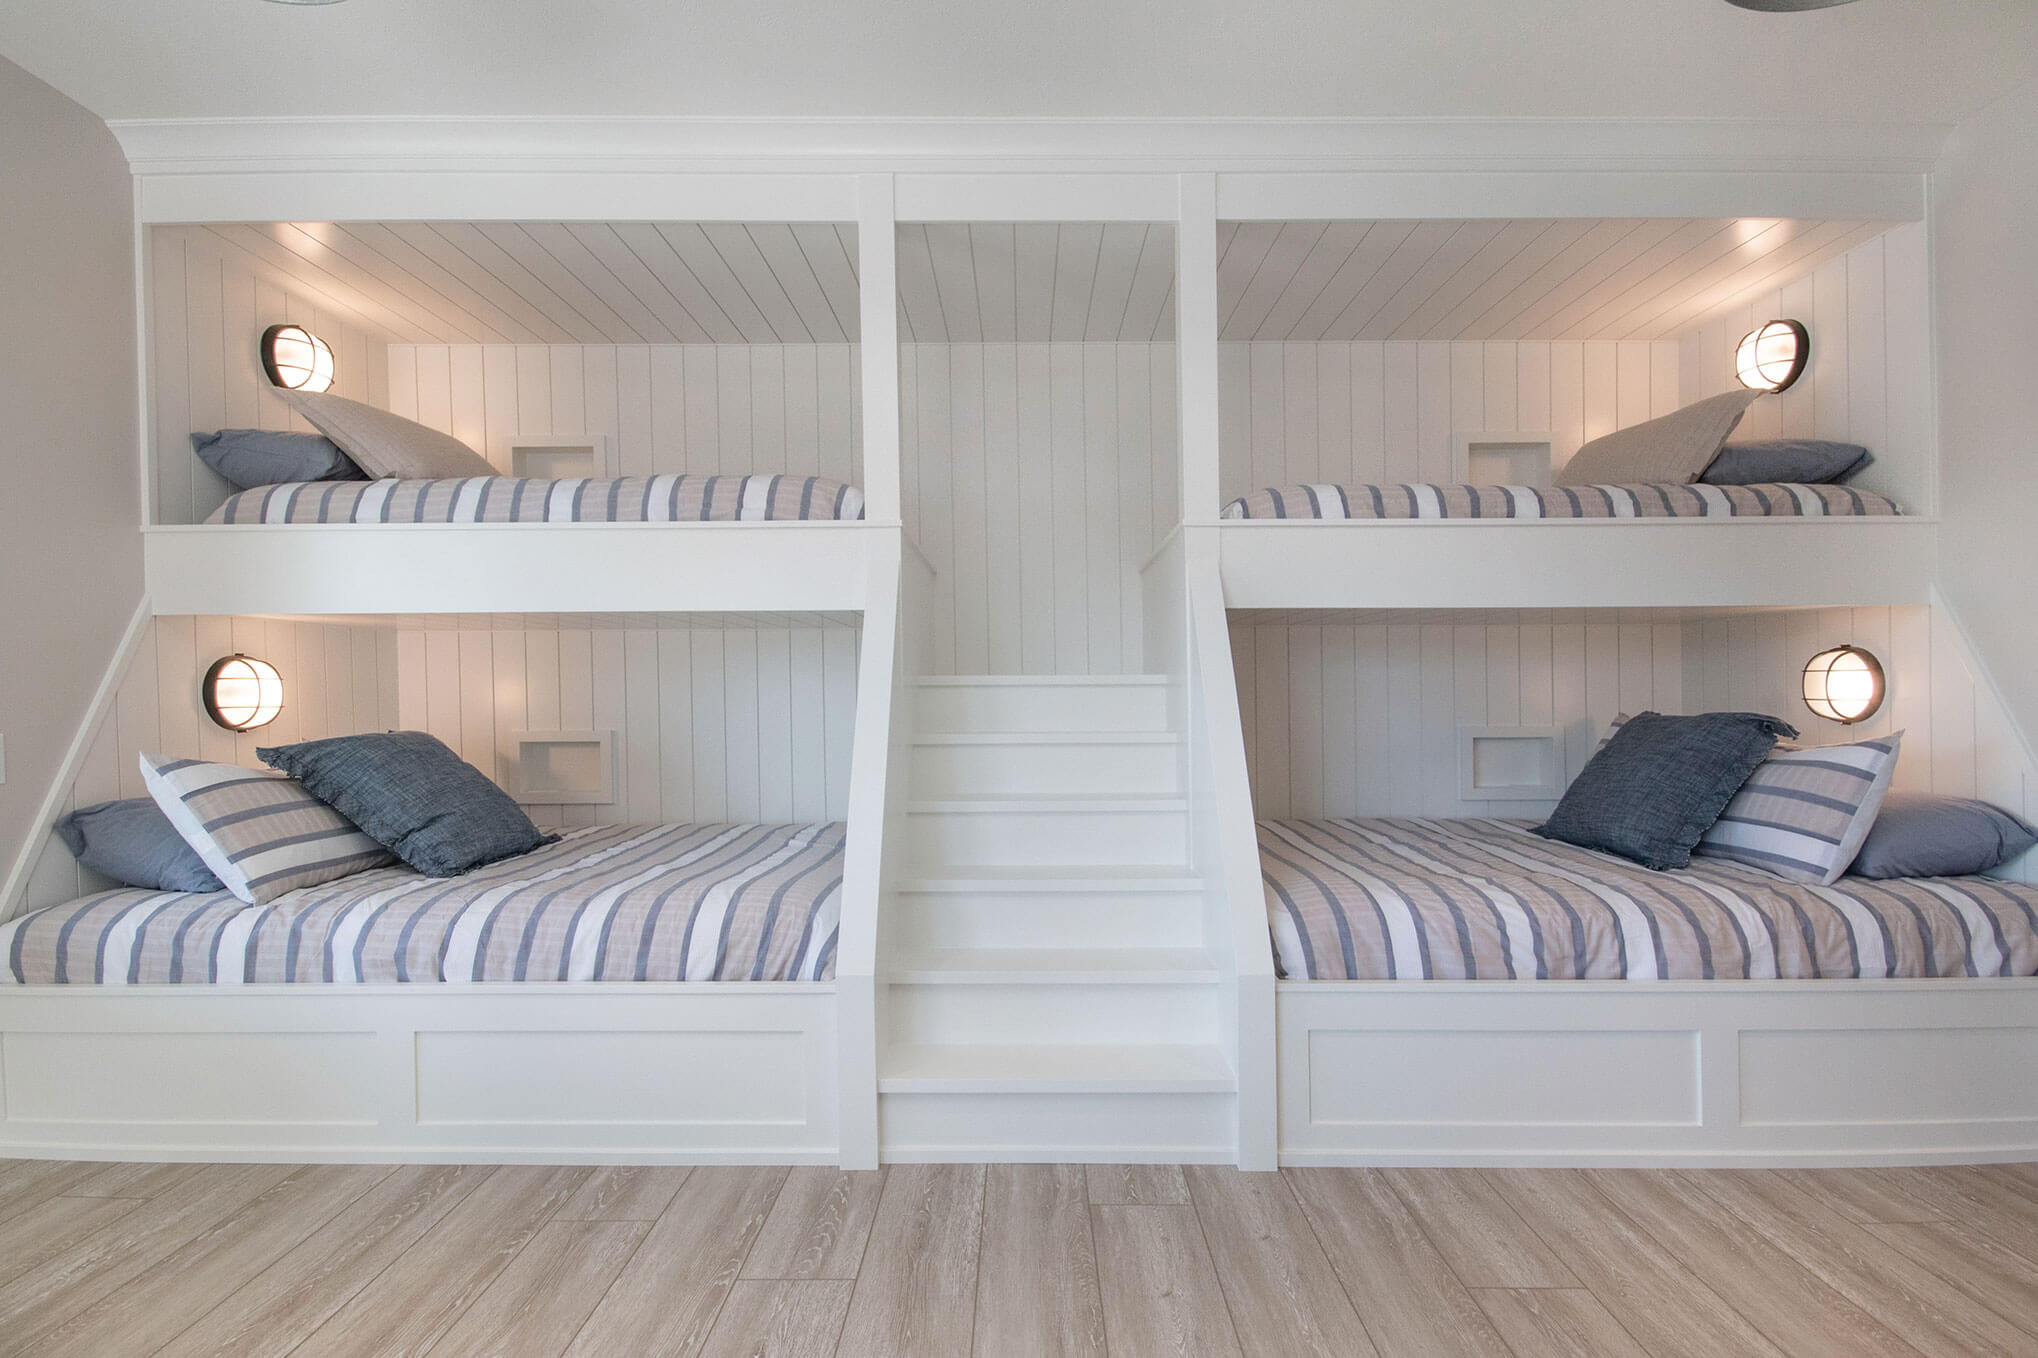 25 Bunk Bed Ideas For Small Bedrooms, Bunk Bed Alternatives